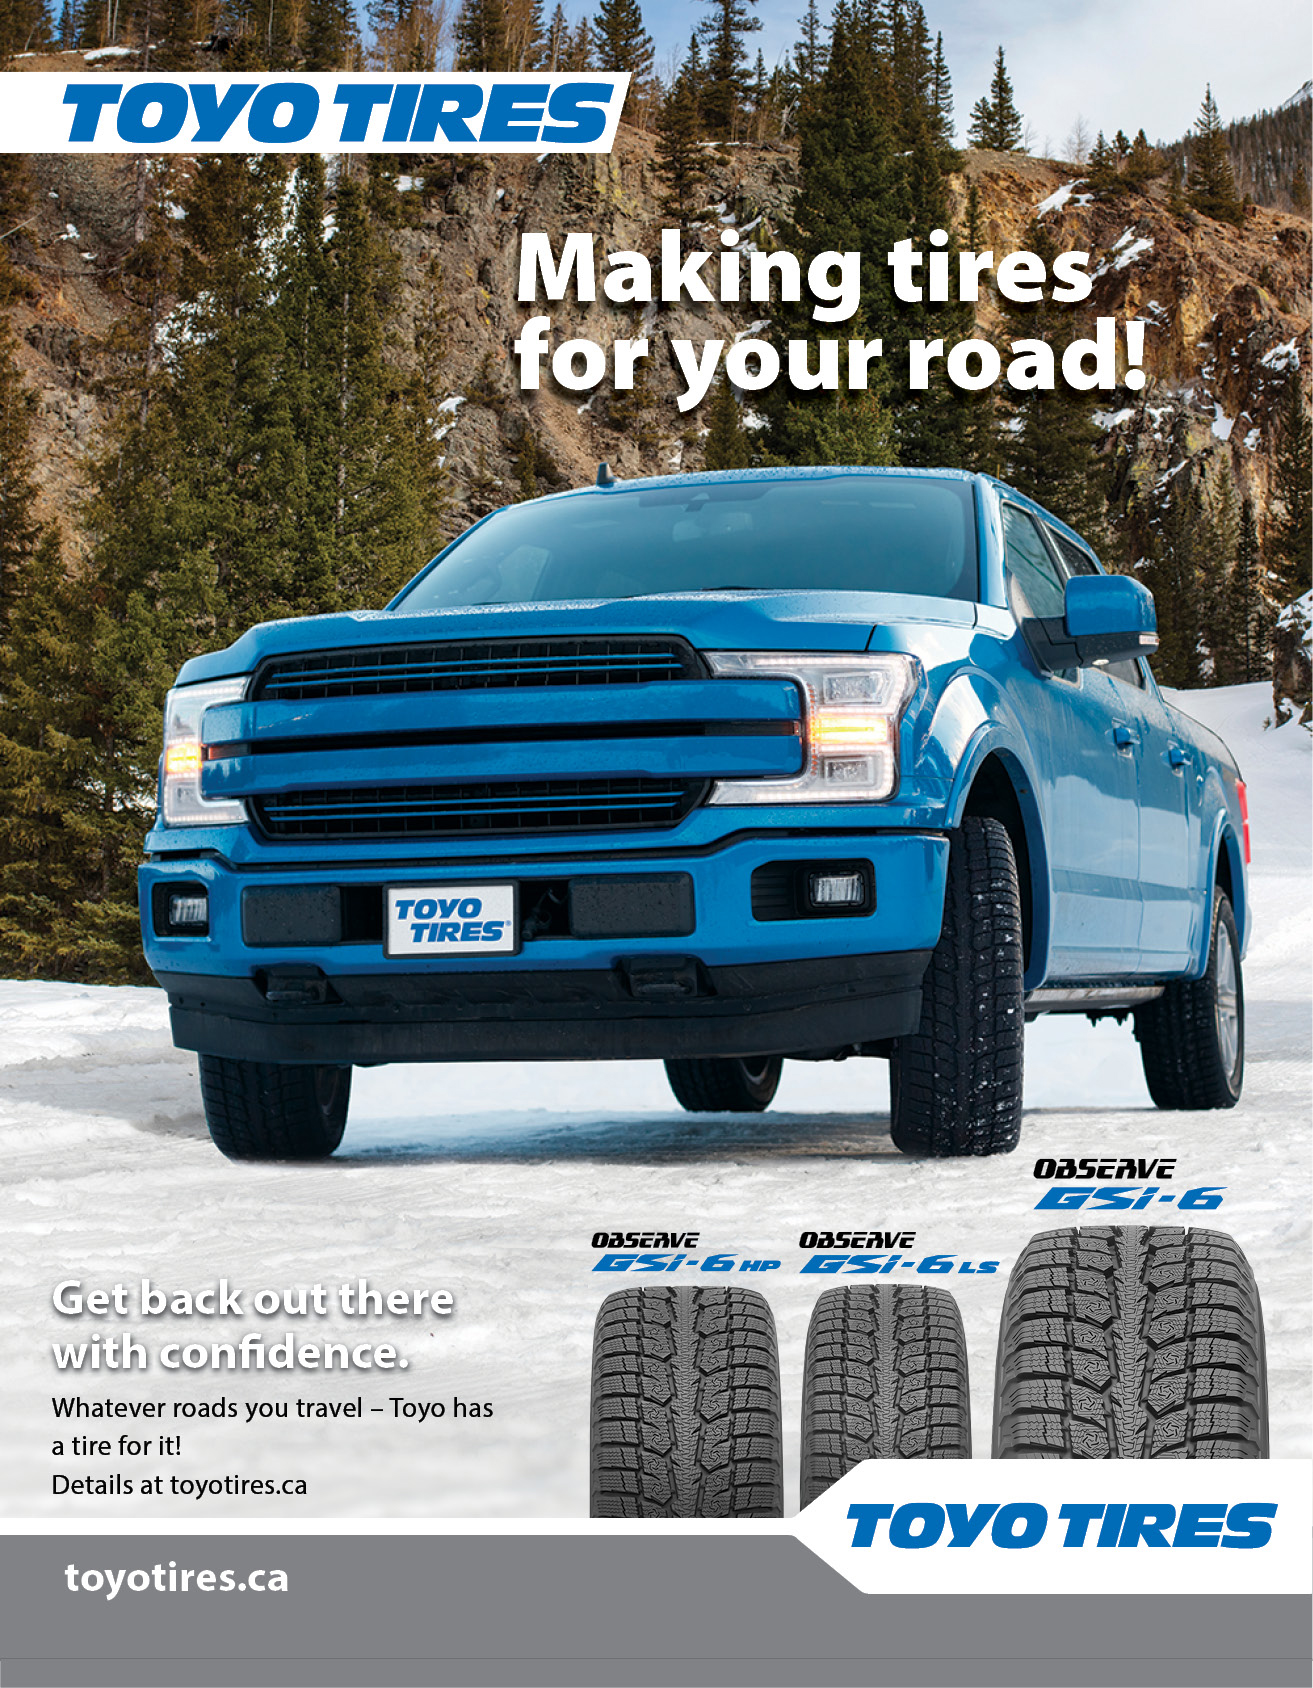 Toyo Tires Fall 2022 rebate event. Starts September 17th and ends December 15th.